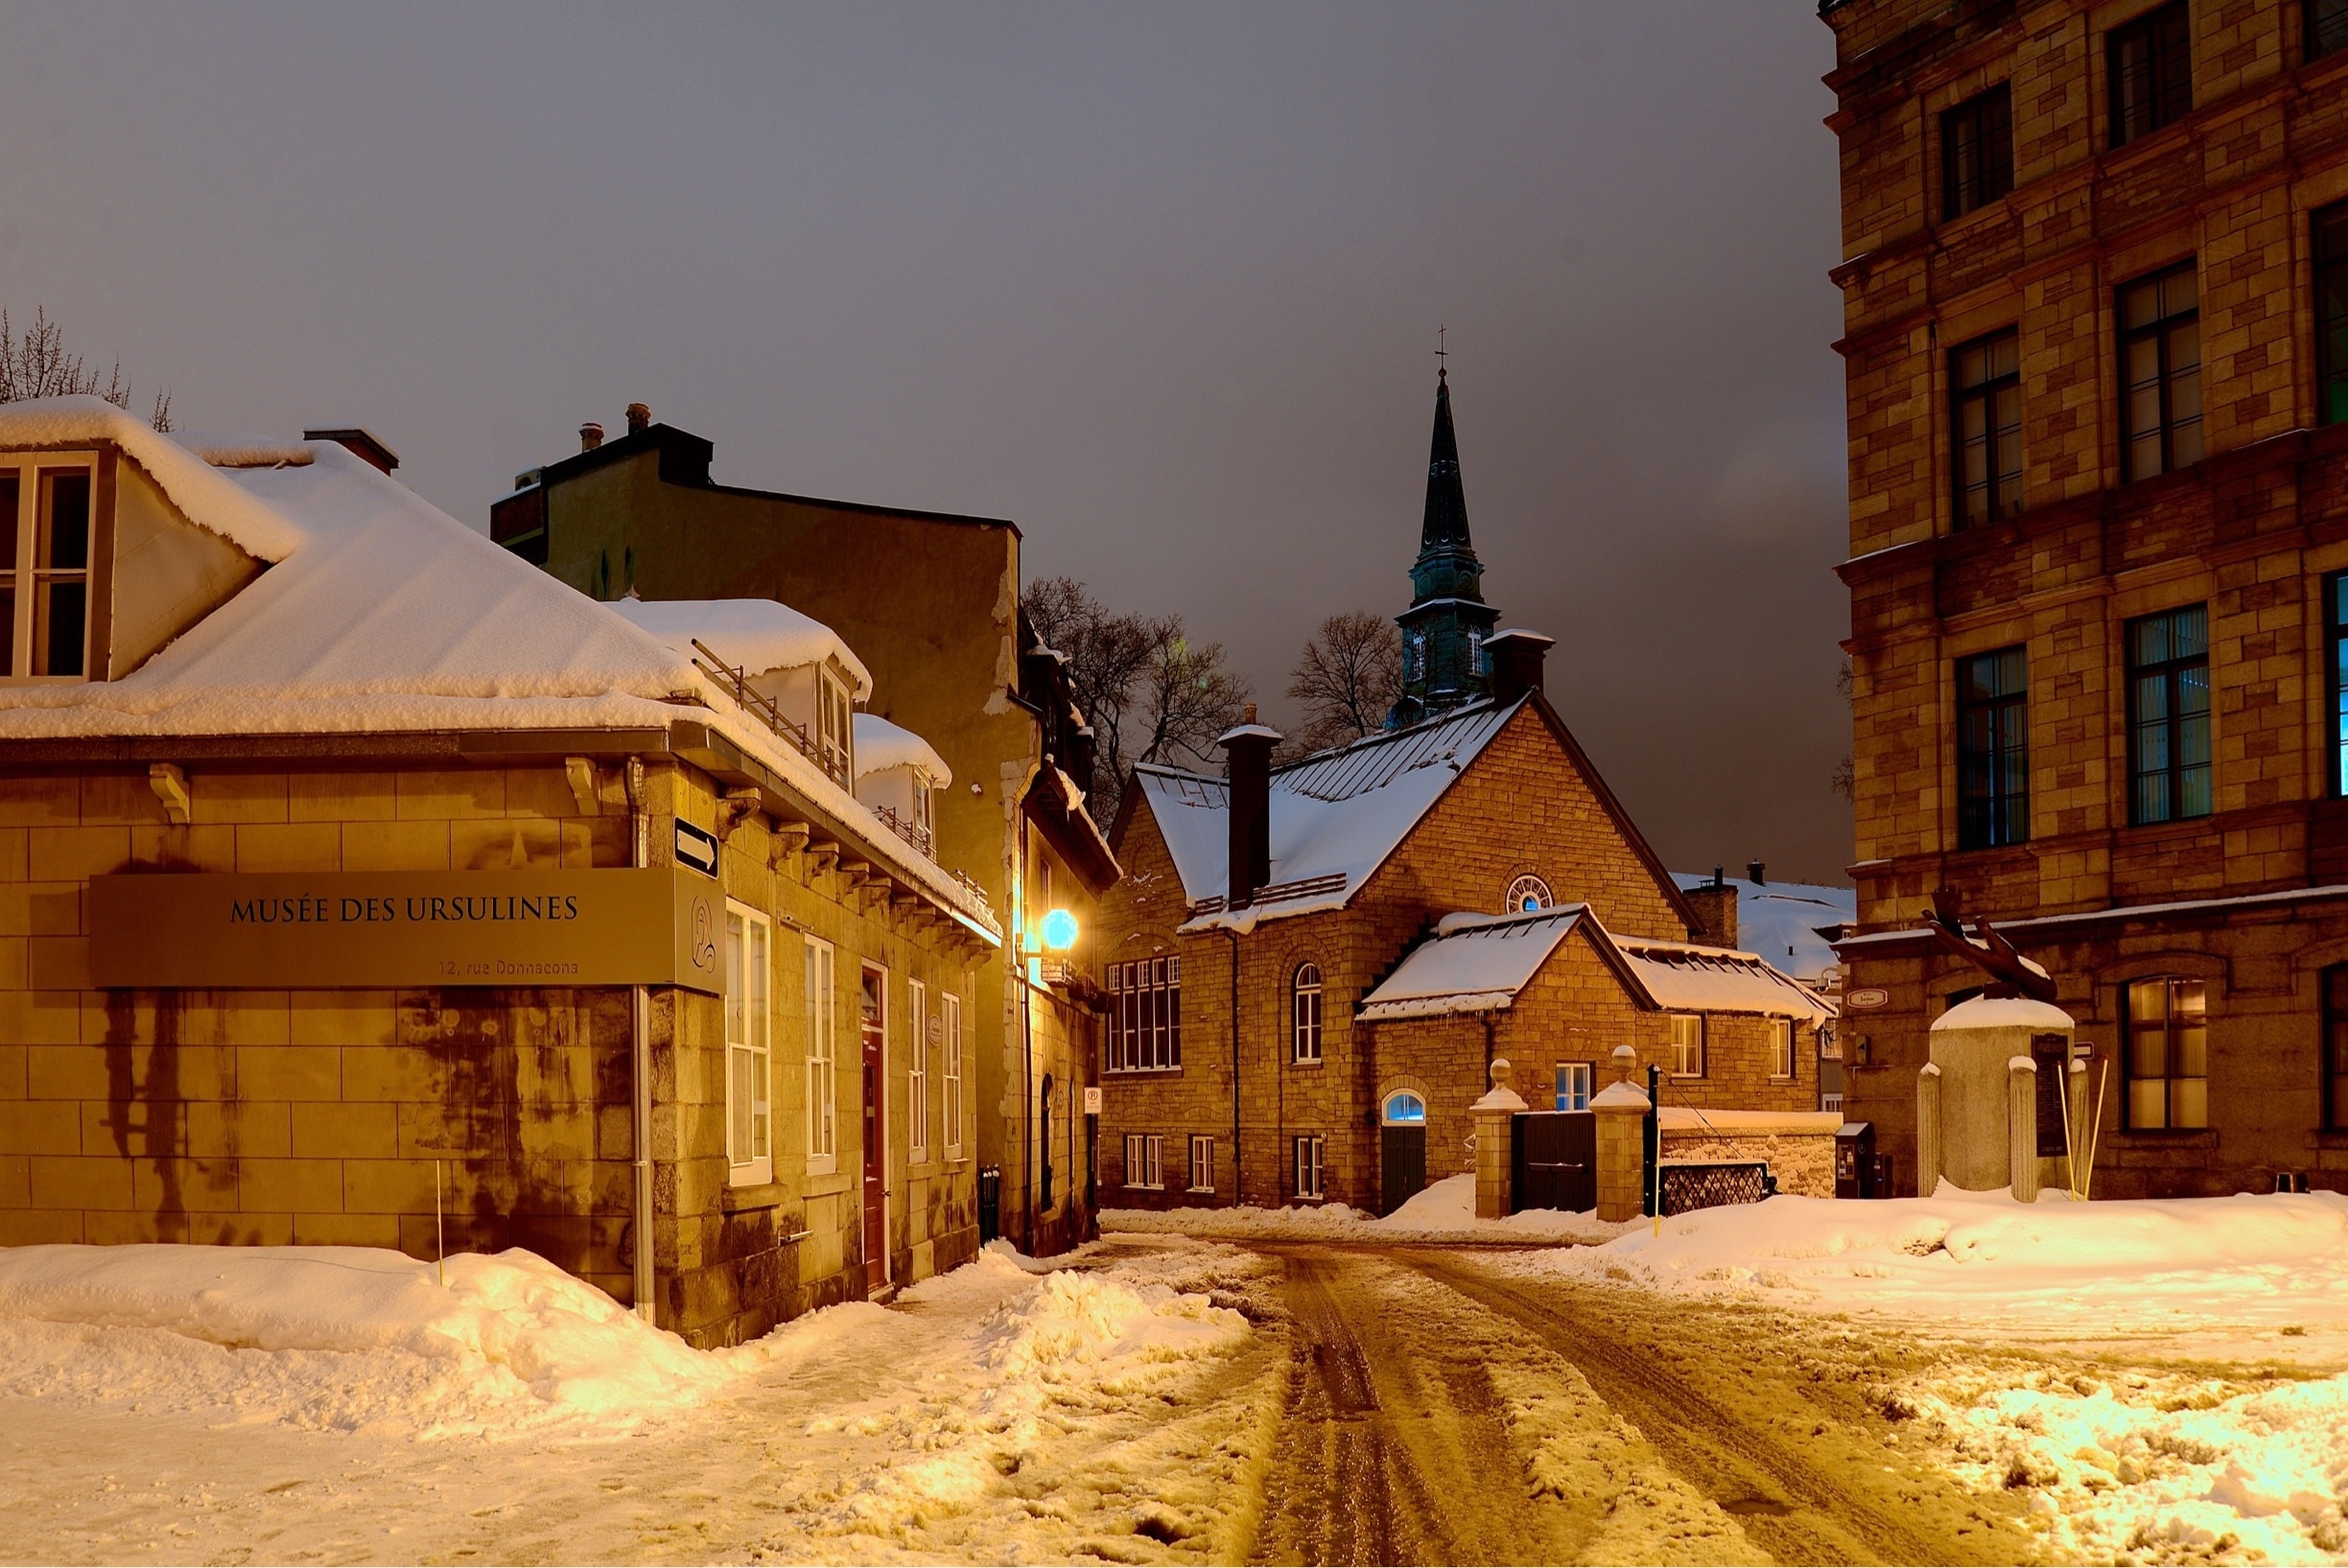 UNESCO World Heritage Site: Historic District of Old Québec
Old Quebec (Vieux-Québec), the only fortified city north of Mexico and second largest French speaking city in Canada.
#InStone #Canada #Quebec #QuebecCity #UNESCOWorldHeritageSite #OldQuebec #NorthAmerica #NewFrance #nightscape #winter